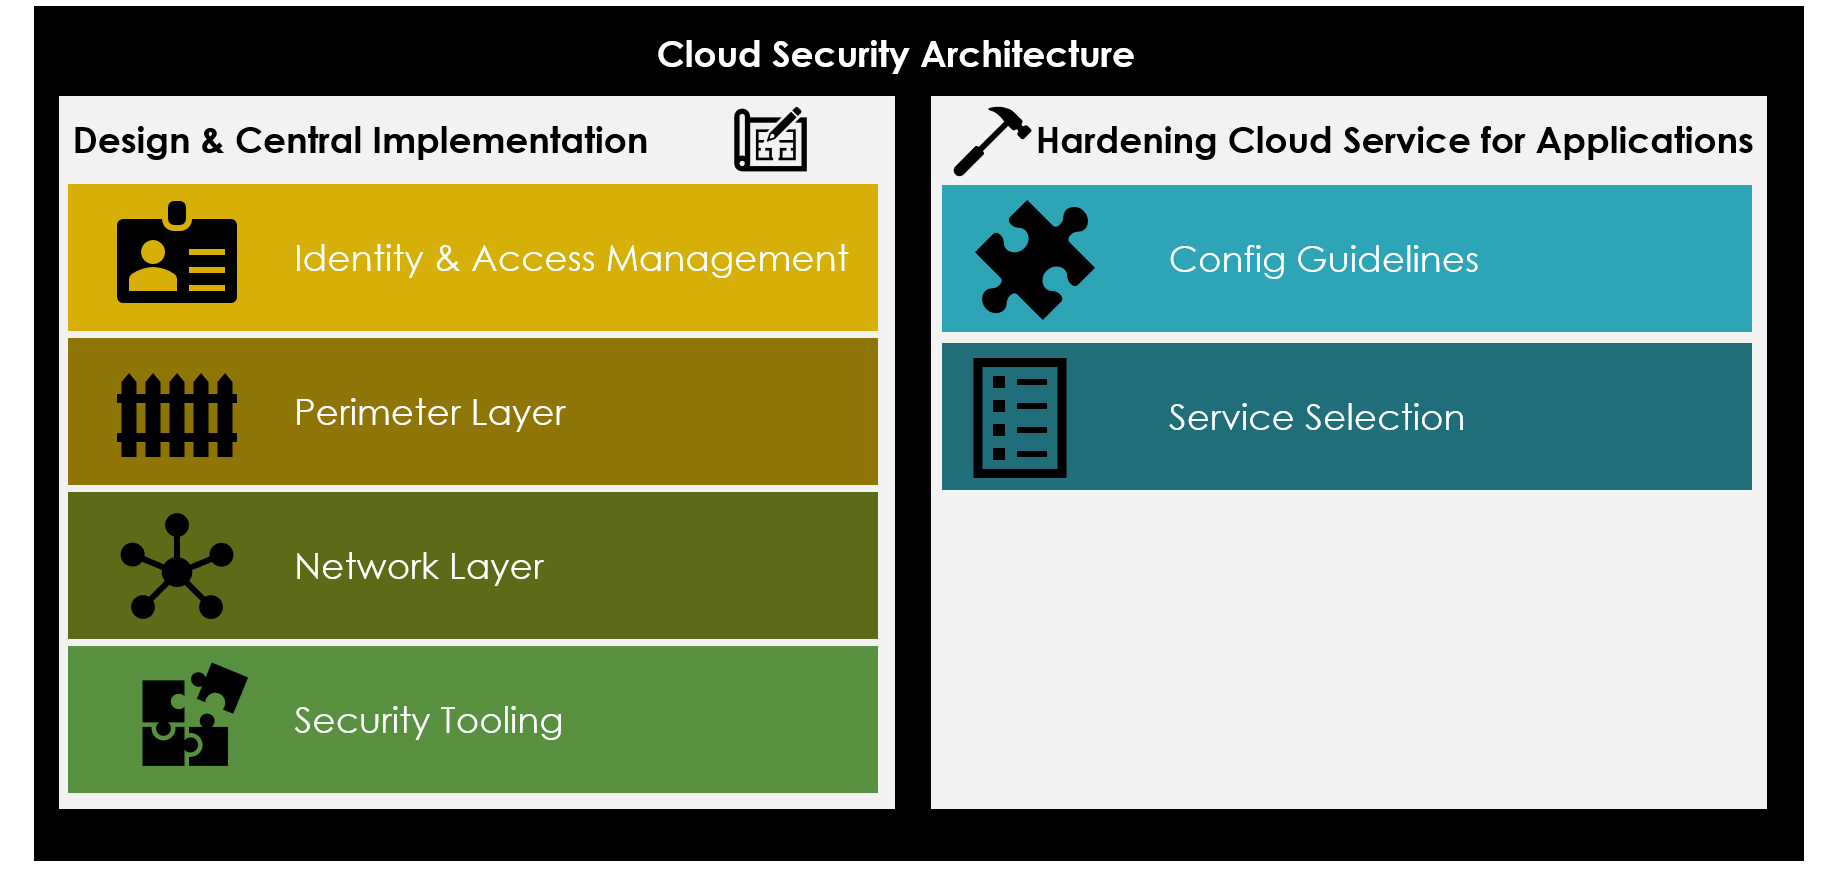 Main Topics for Cloud Security Architecture